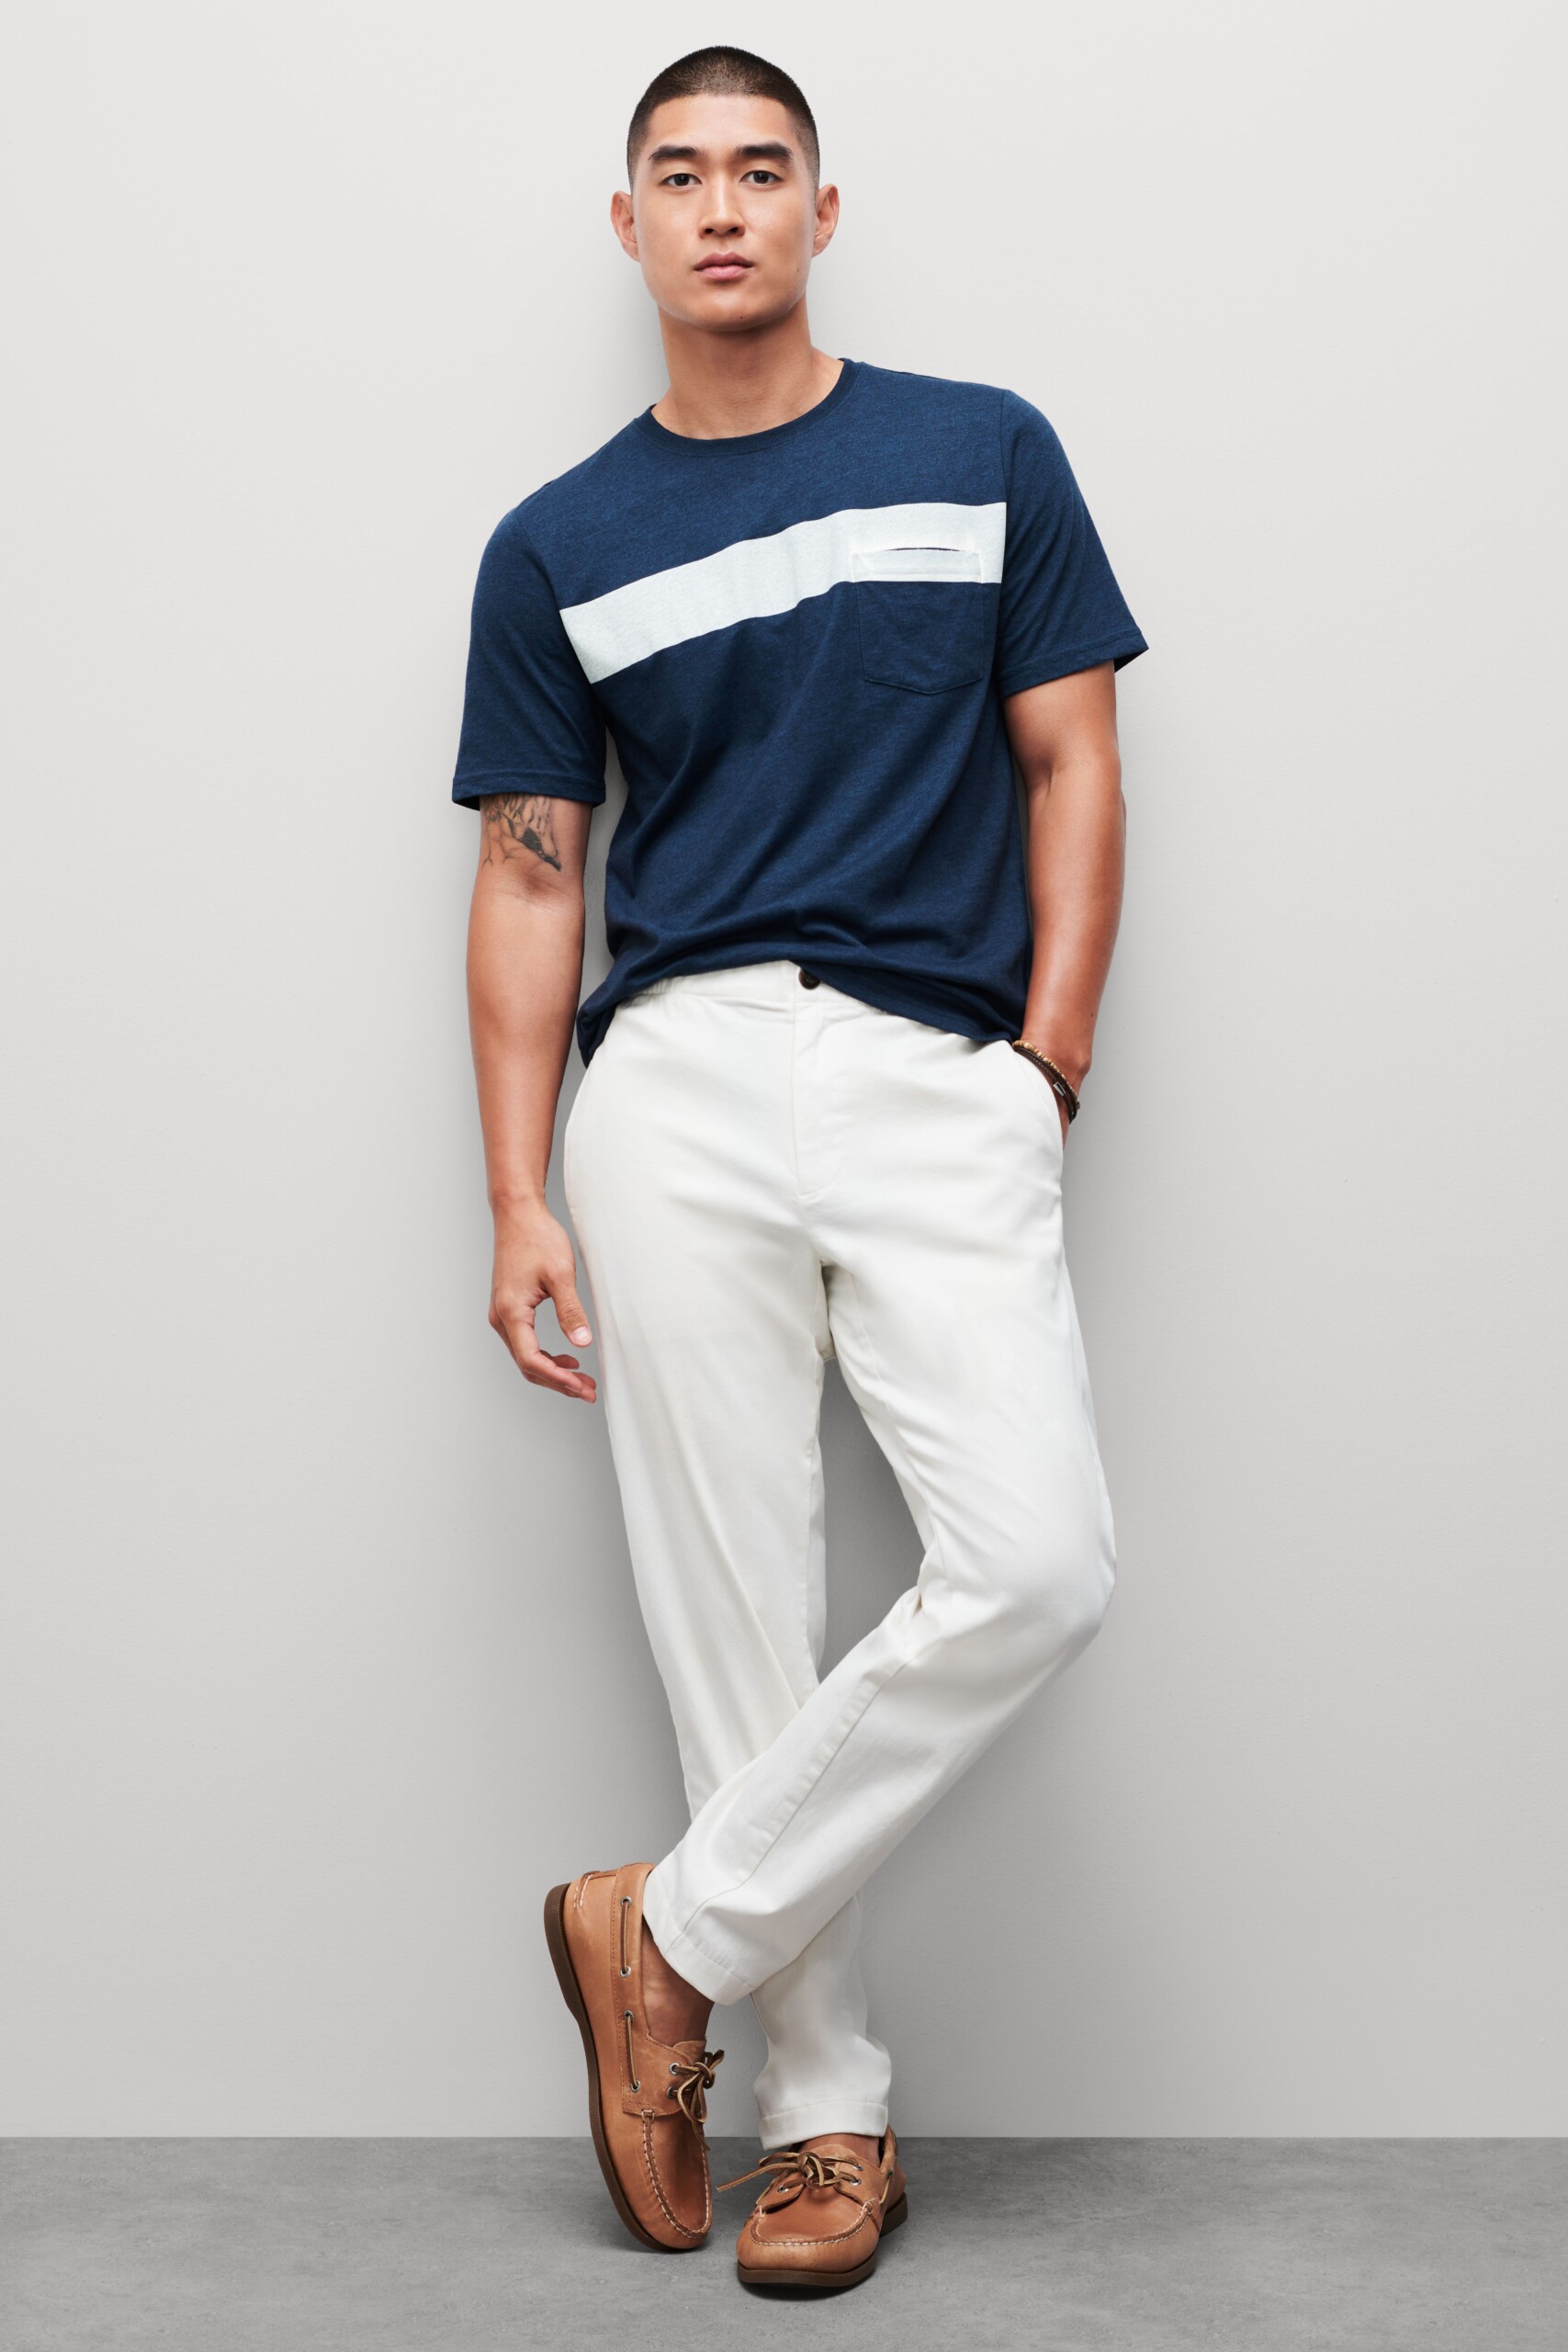 Give it to me Can tuck in a T-shirt? Stitch Fix Men